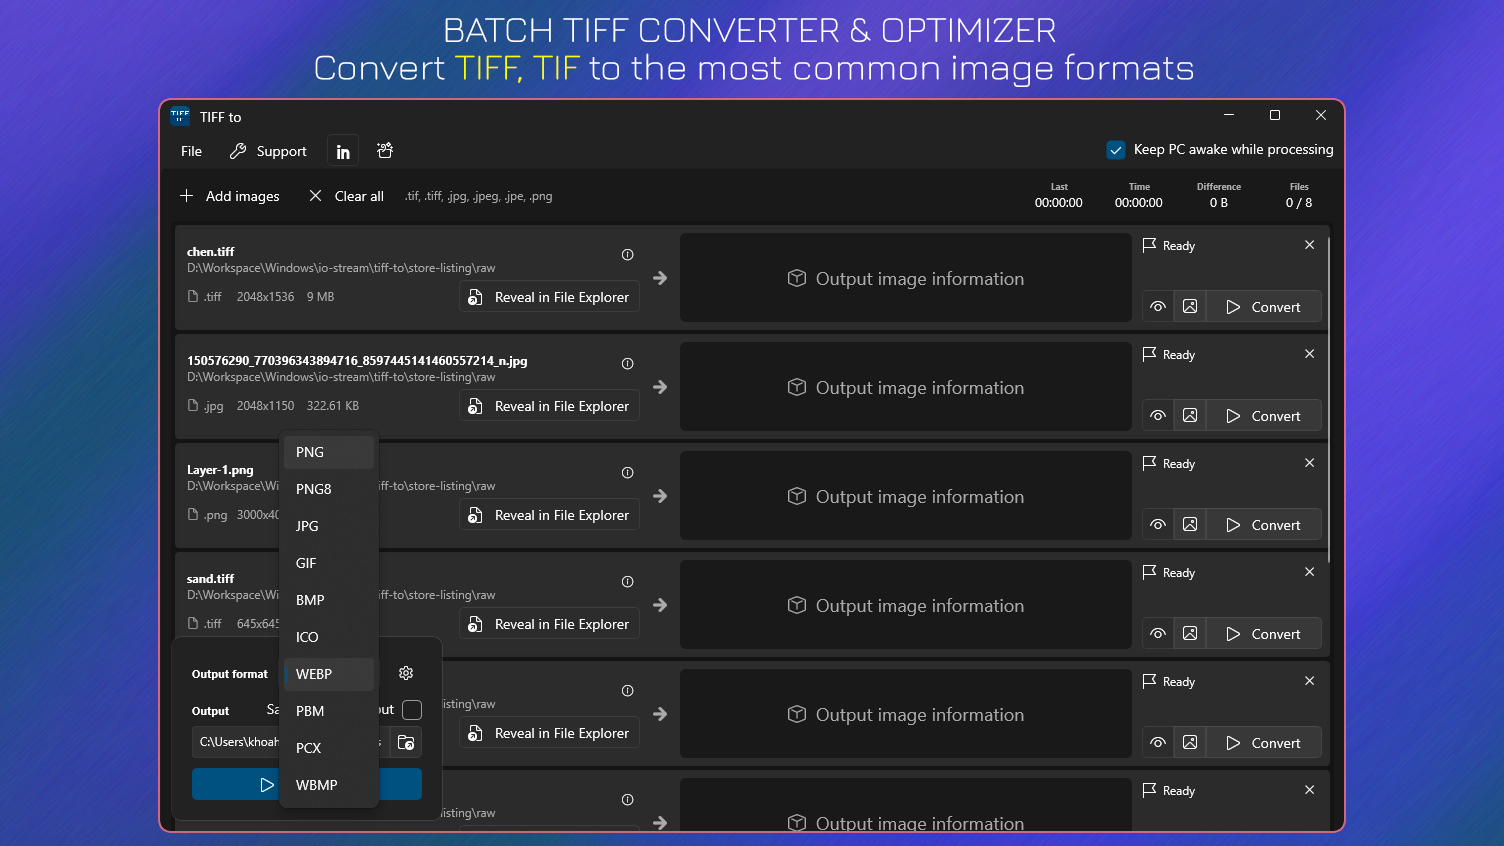 Batch TIFF Converter & Optimizer - Convert TIF, TIFF to the most common image formats.
